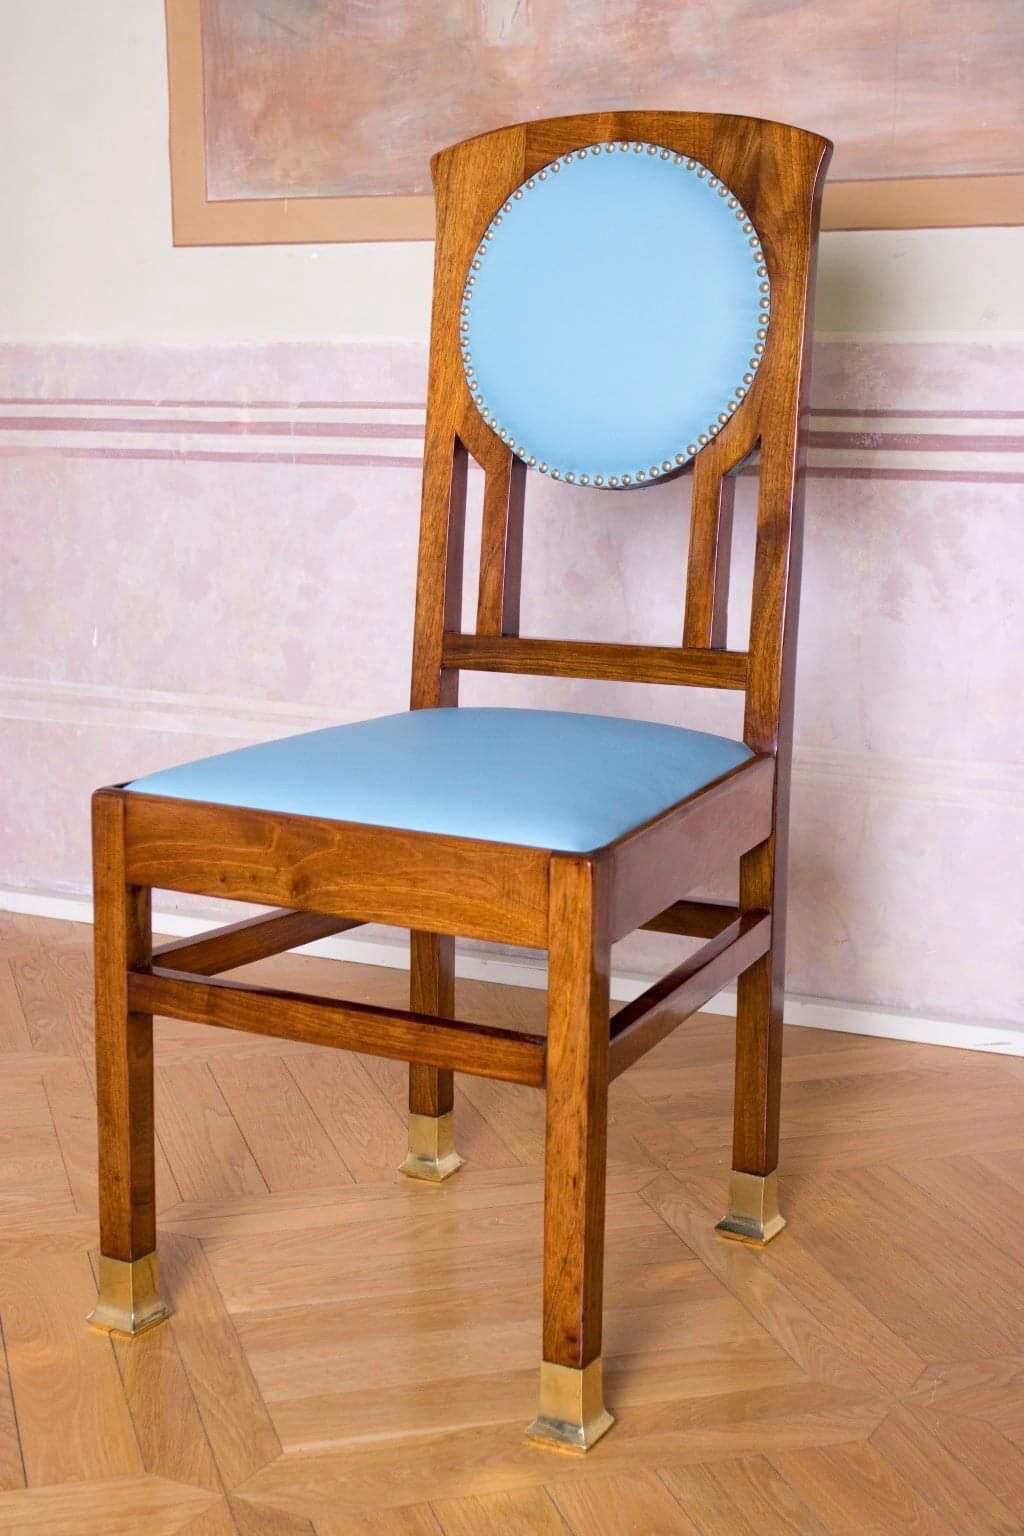 Massive big Secession chair complete restored walnut and copper legs. From Budapest approximately 1920. Upholstered whit new Italian blue leather.